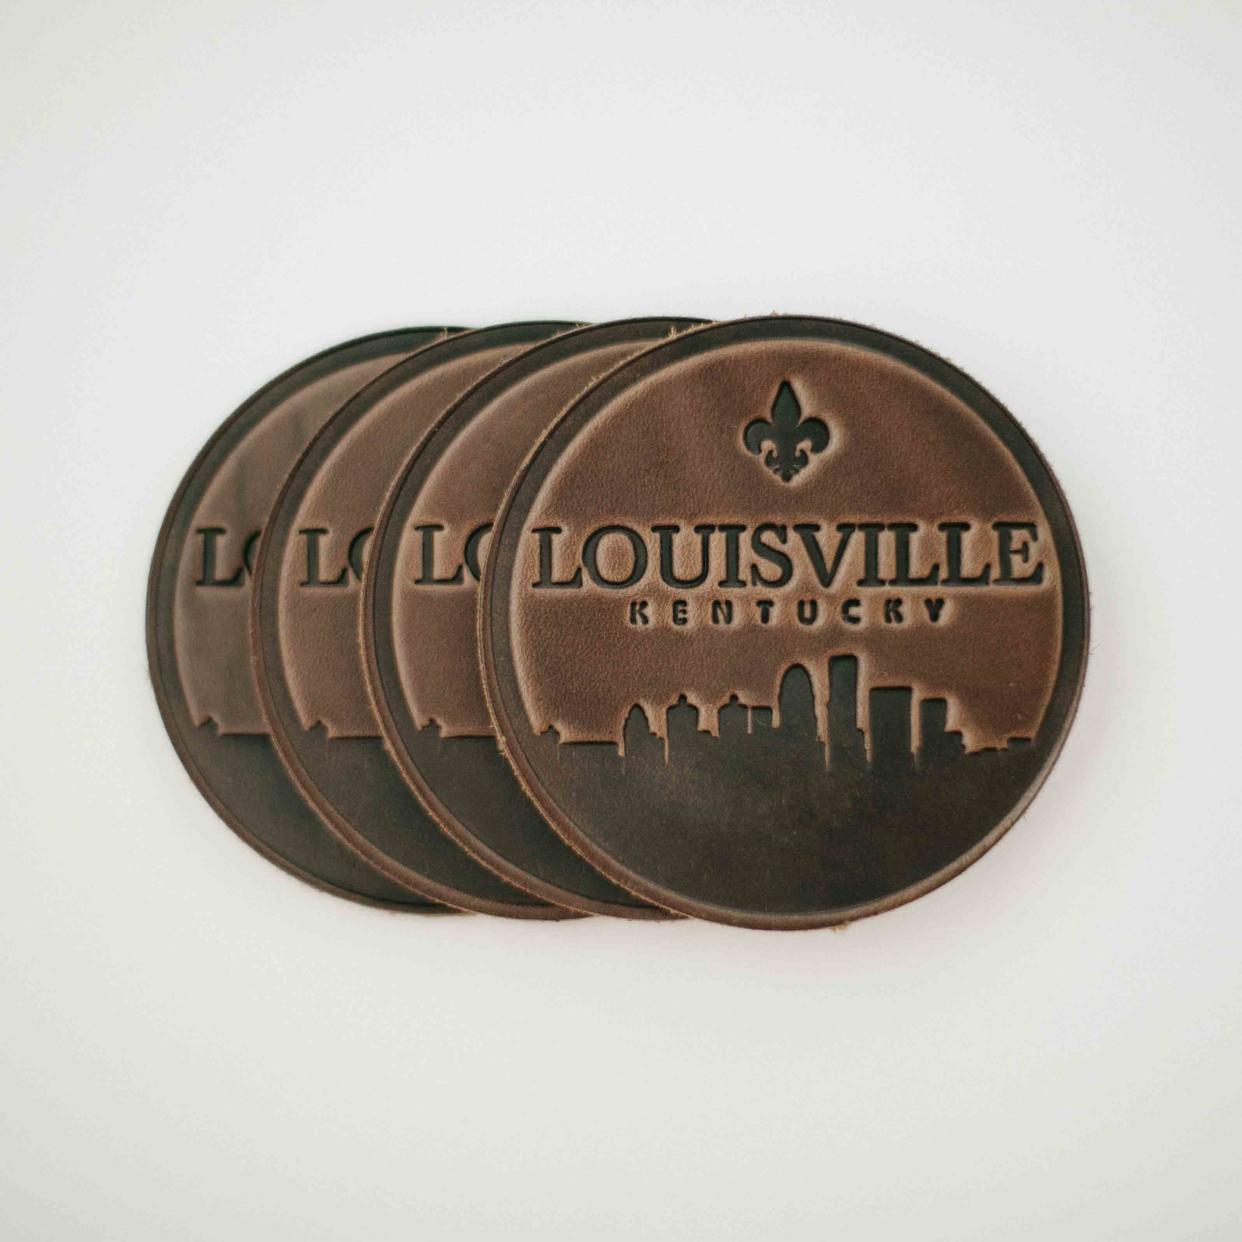 Add some understated Bluegrass State flair to your home with a variety of Kentucky- and Louisville-inspired coasters from Louisville-based Clayton & Crume.